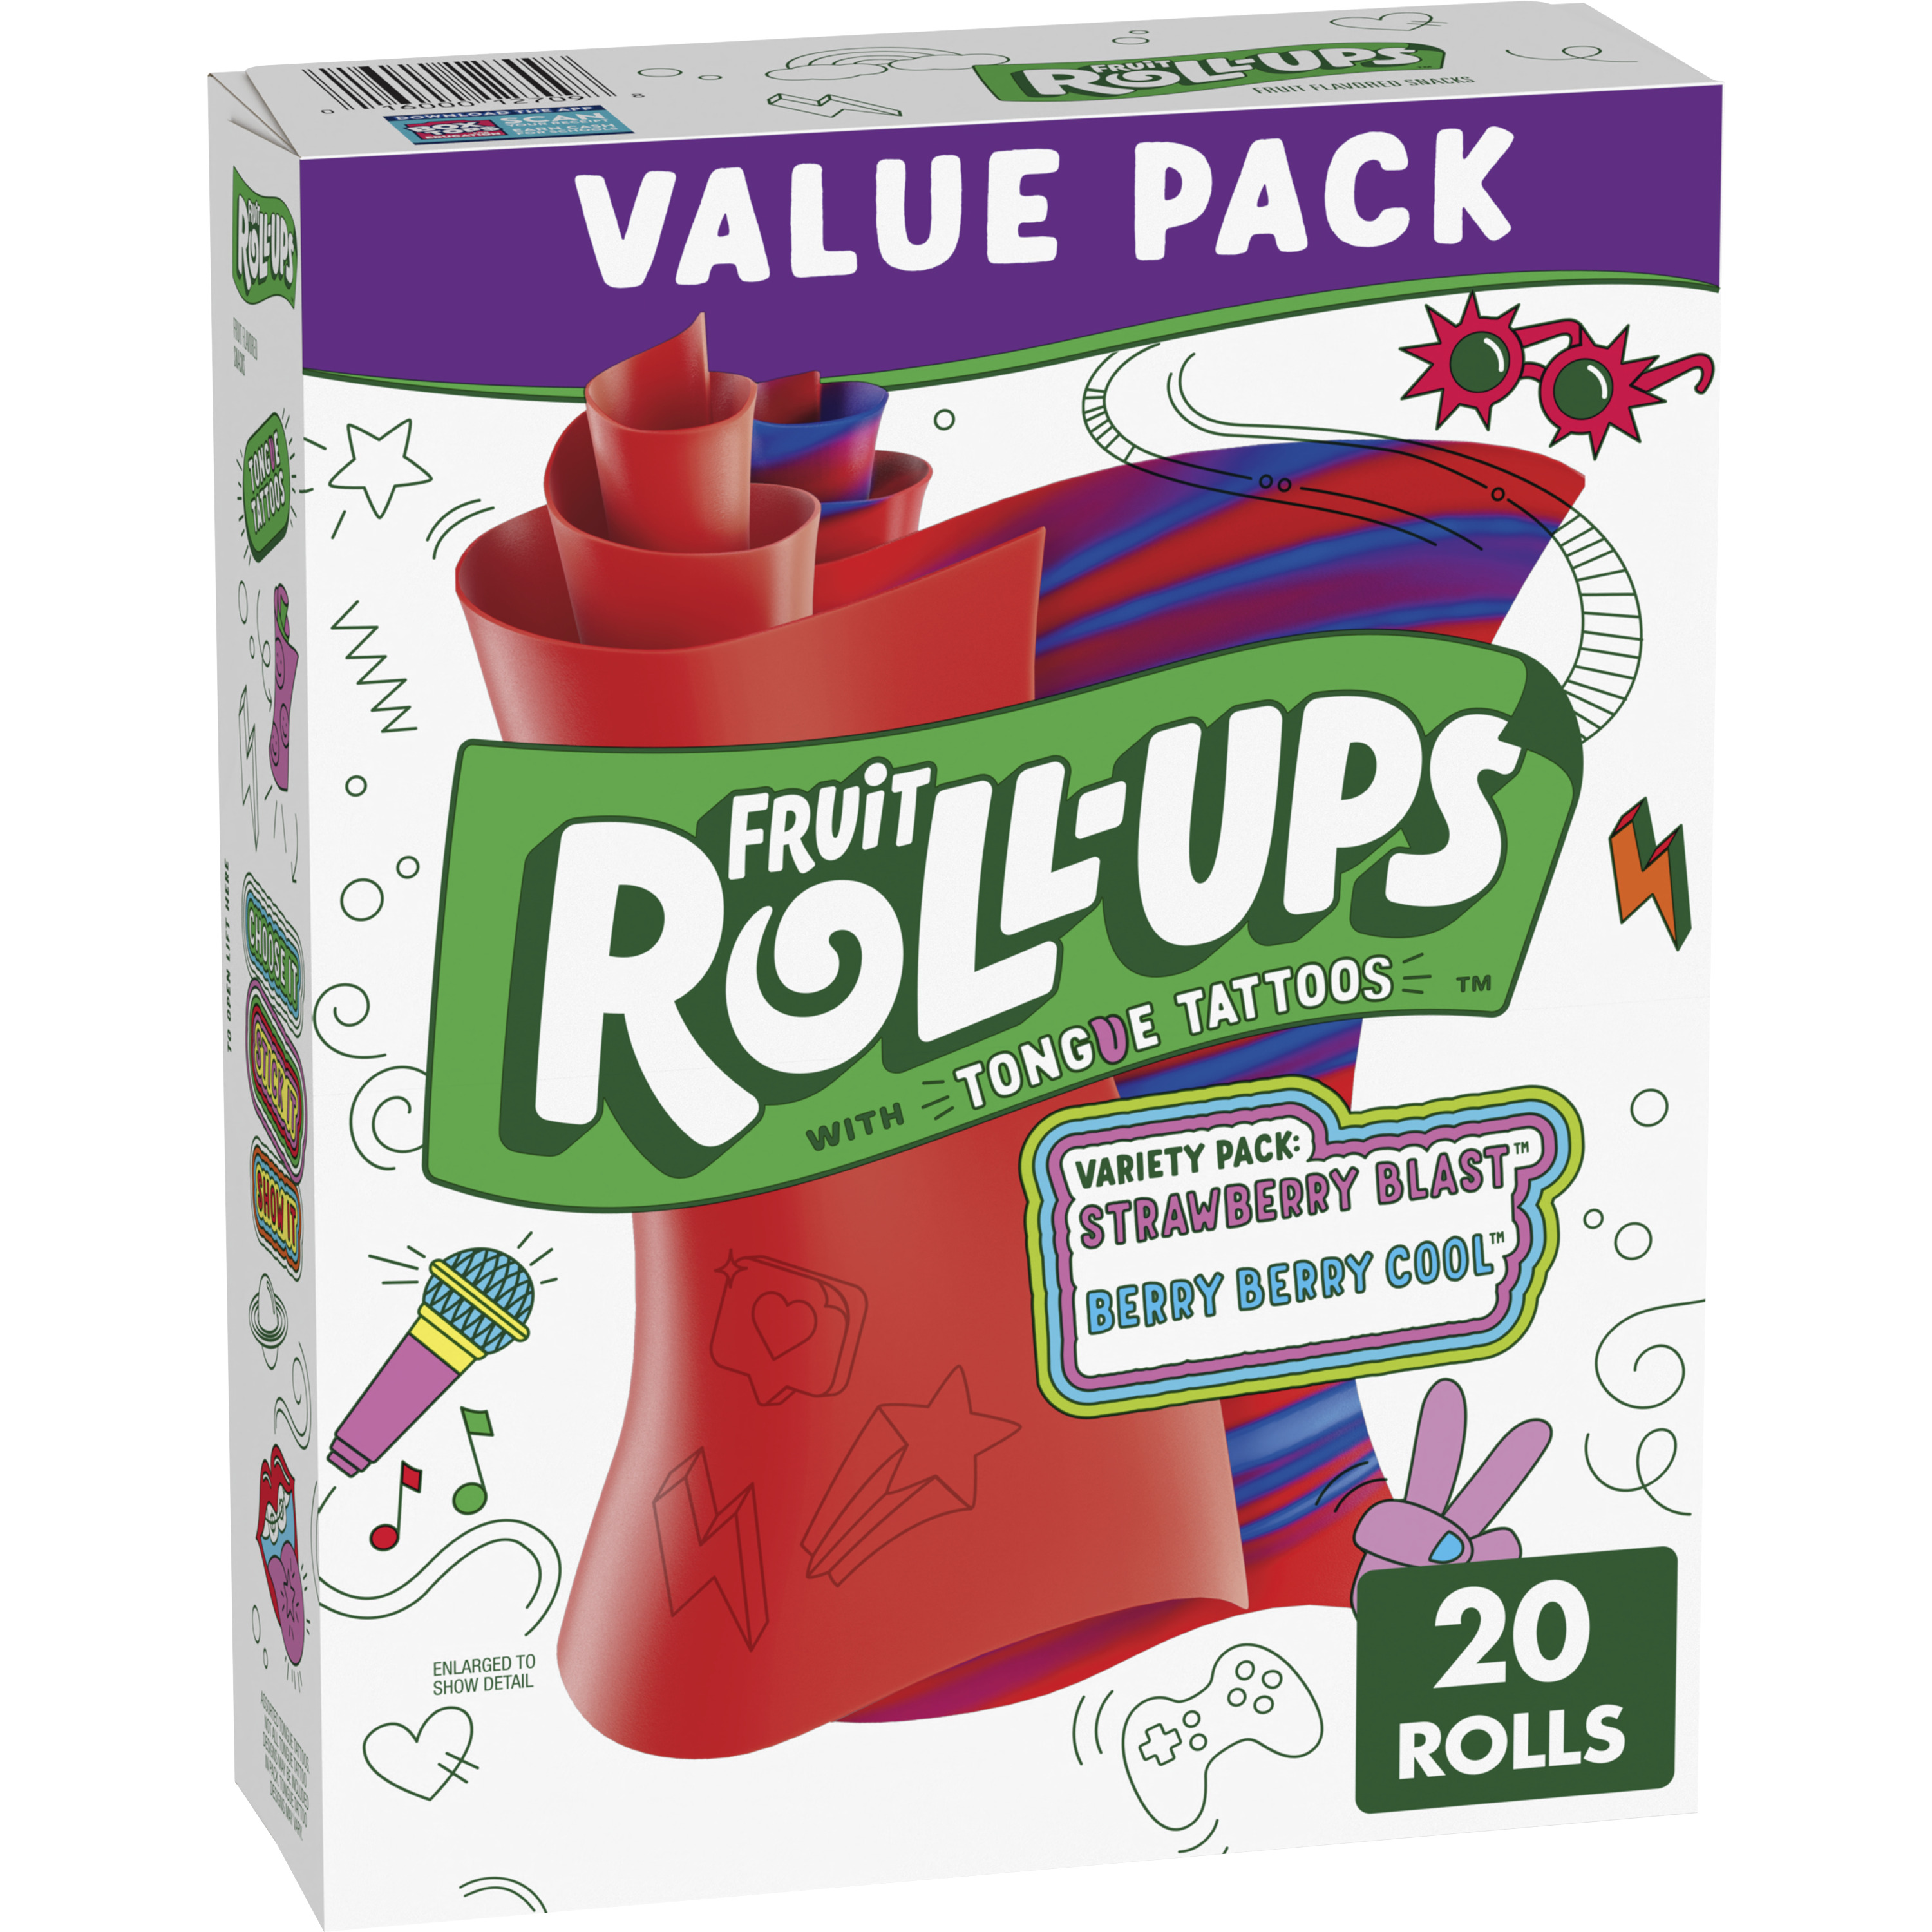 Fruit Roll-Ups Fruit Flavored Snacks, Variety Value Pack, 0.5 oz, 20 ct - image 1 of 9